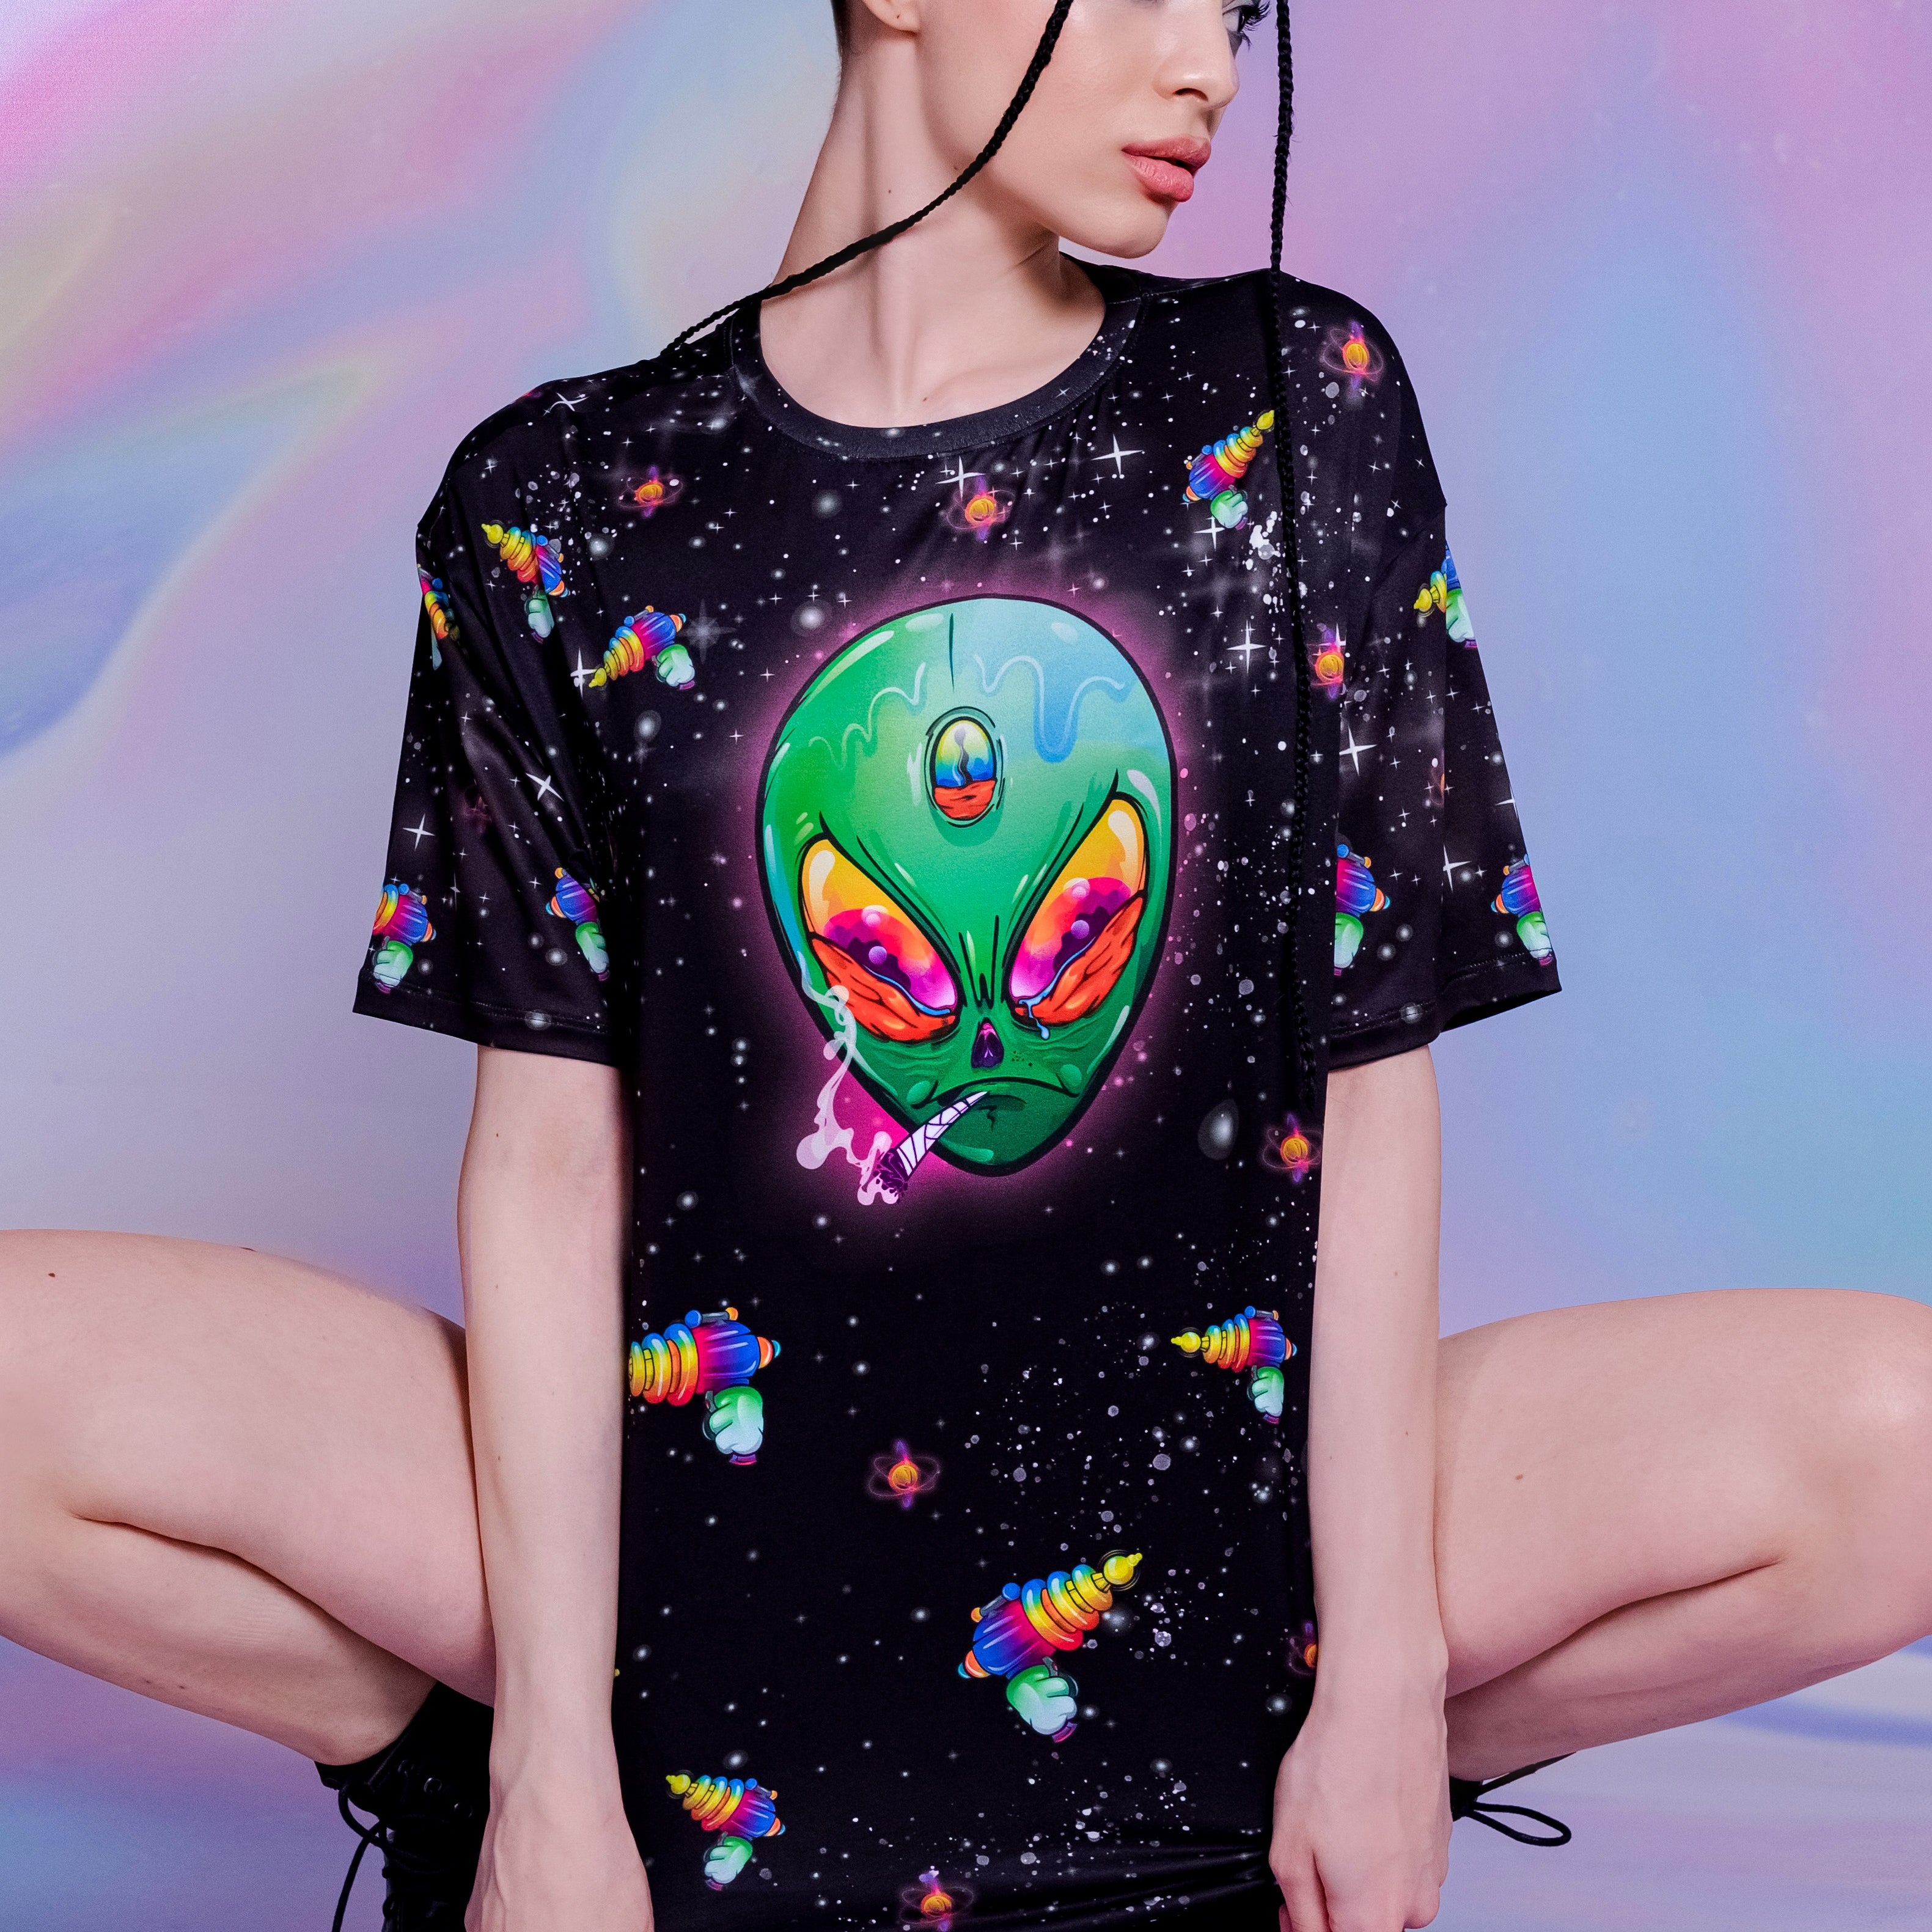 Oversized graphic tee for women with printed smoking alien